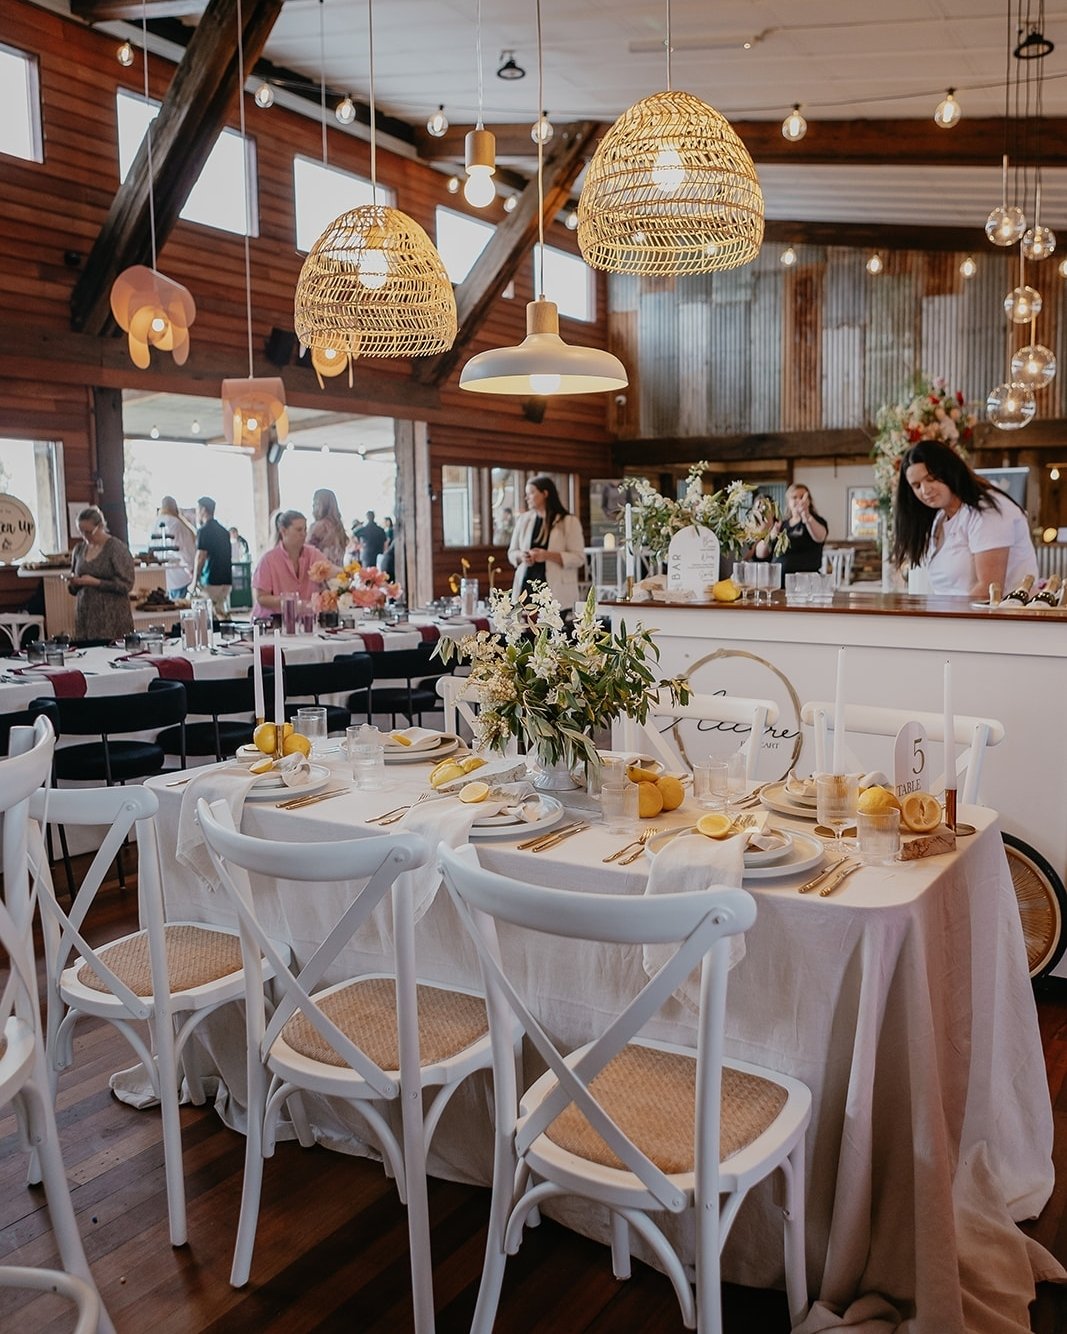 Sabina River Farm's function space was full to the brim with beautifully styled spaces at last years event, what will we be seeing this year?!

@allurebarcart @festoon_lighting @erin.hansen.events @sabinariverfarm @hire_in_style_wa @placeoflove.photo